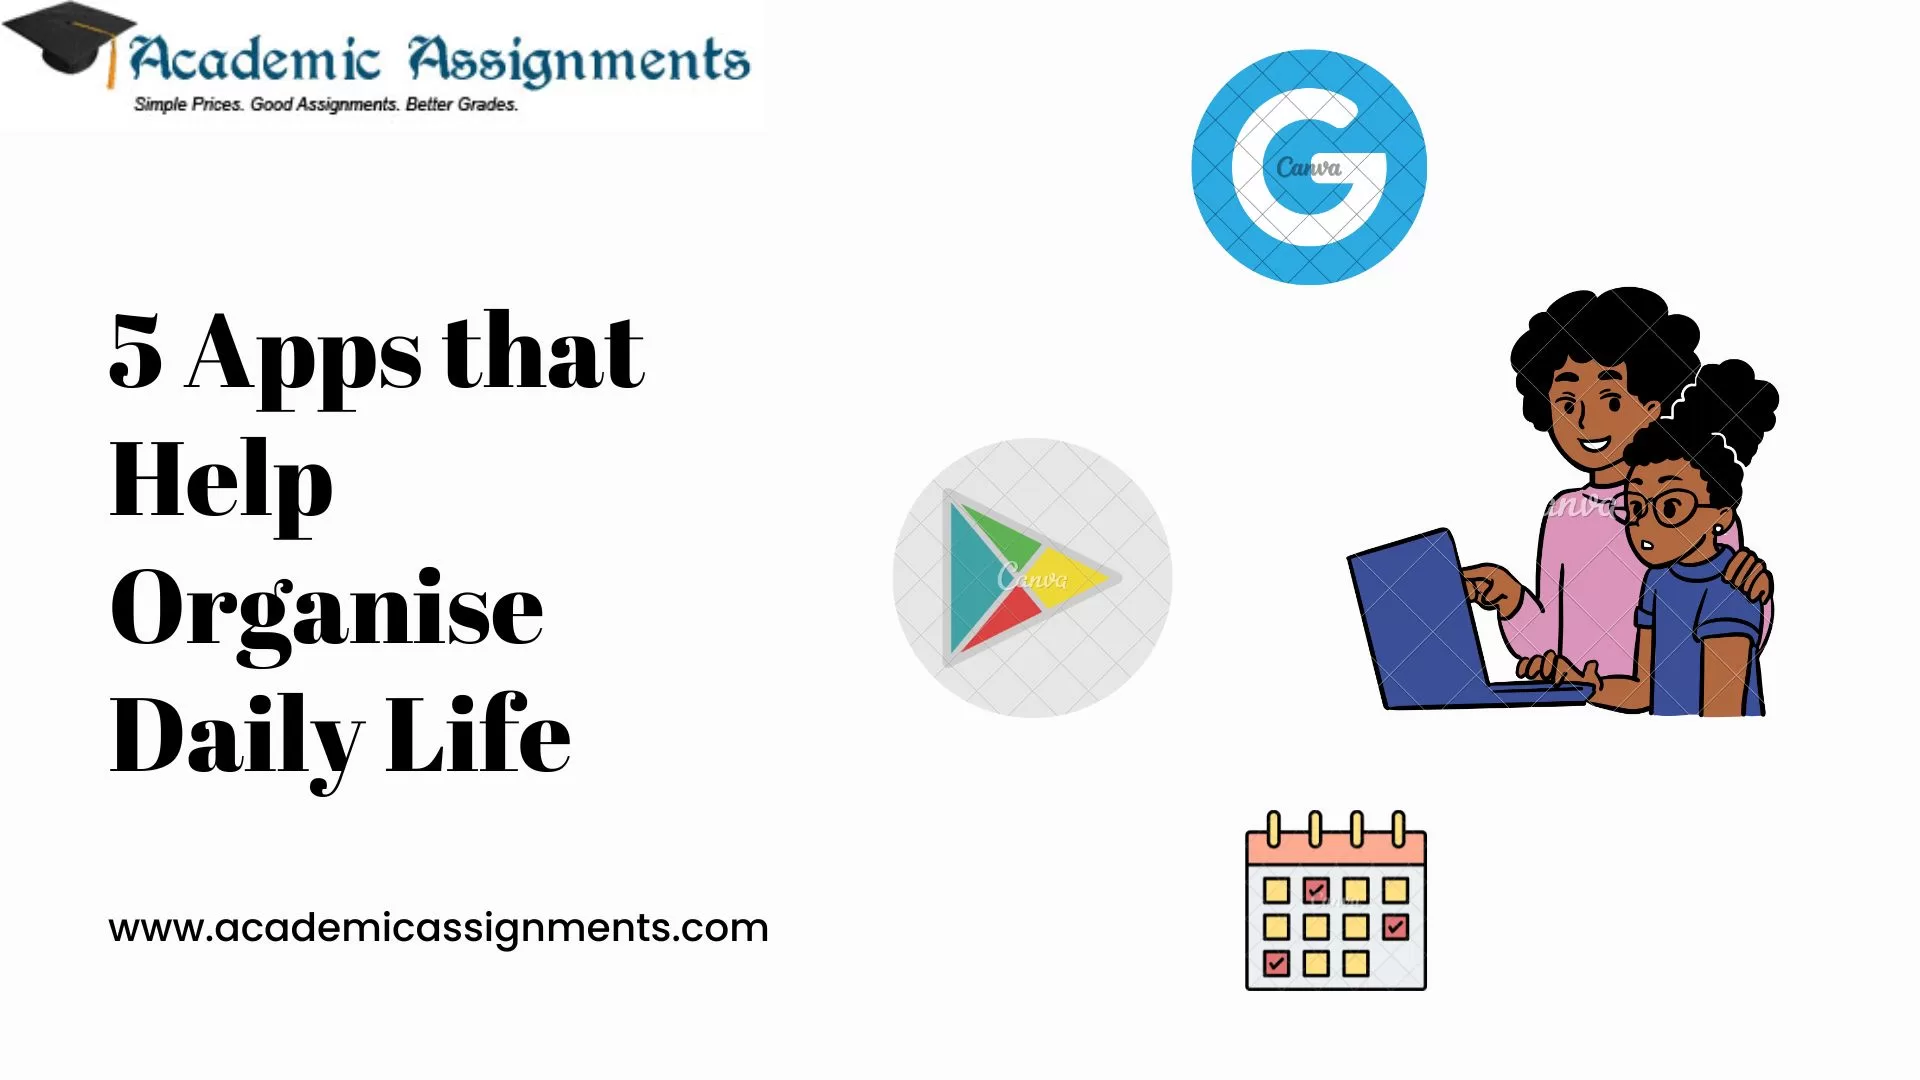 5 Apps that Help Organise Daily Life